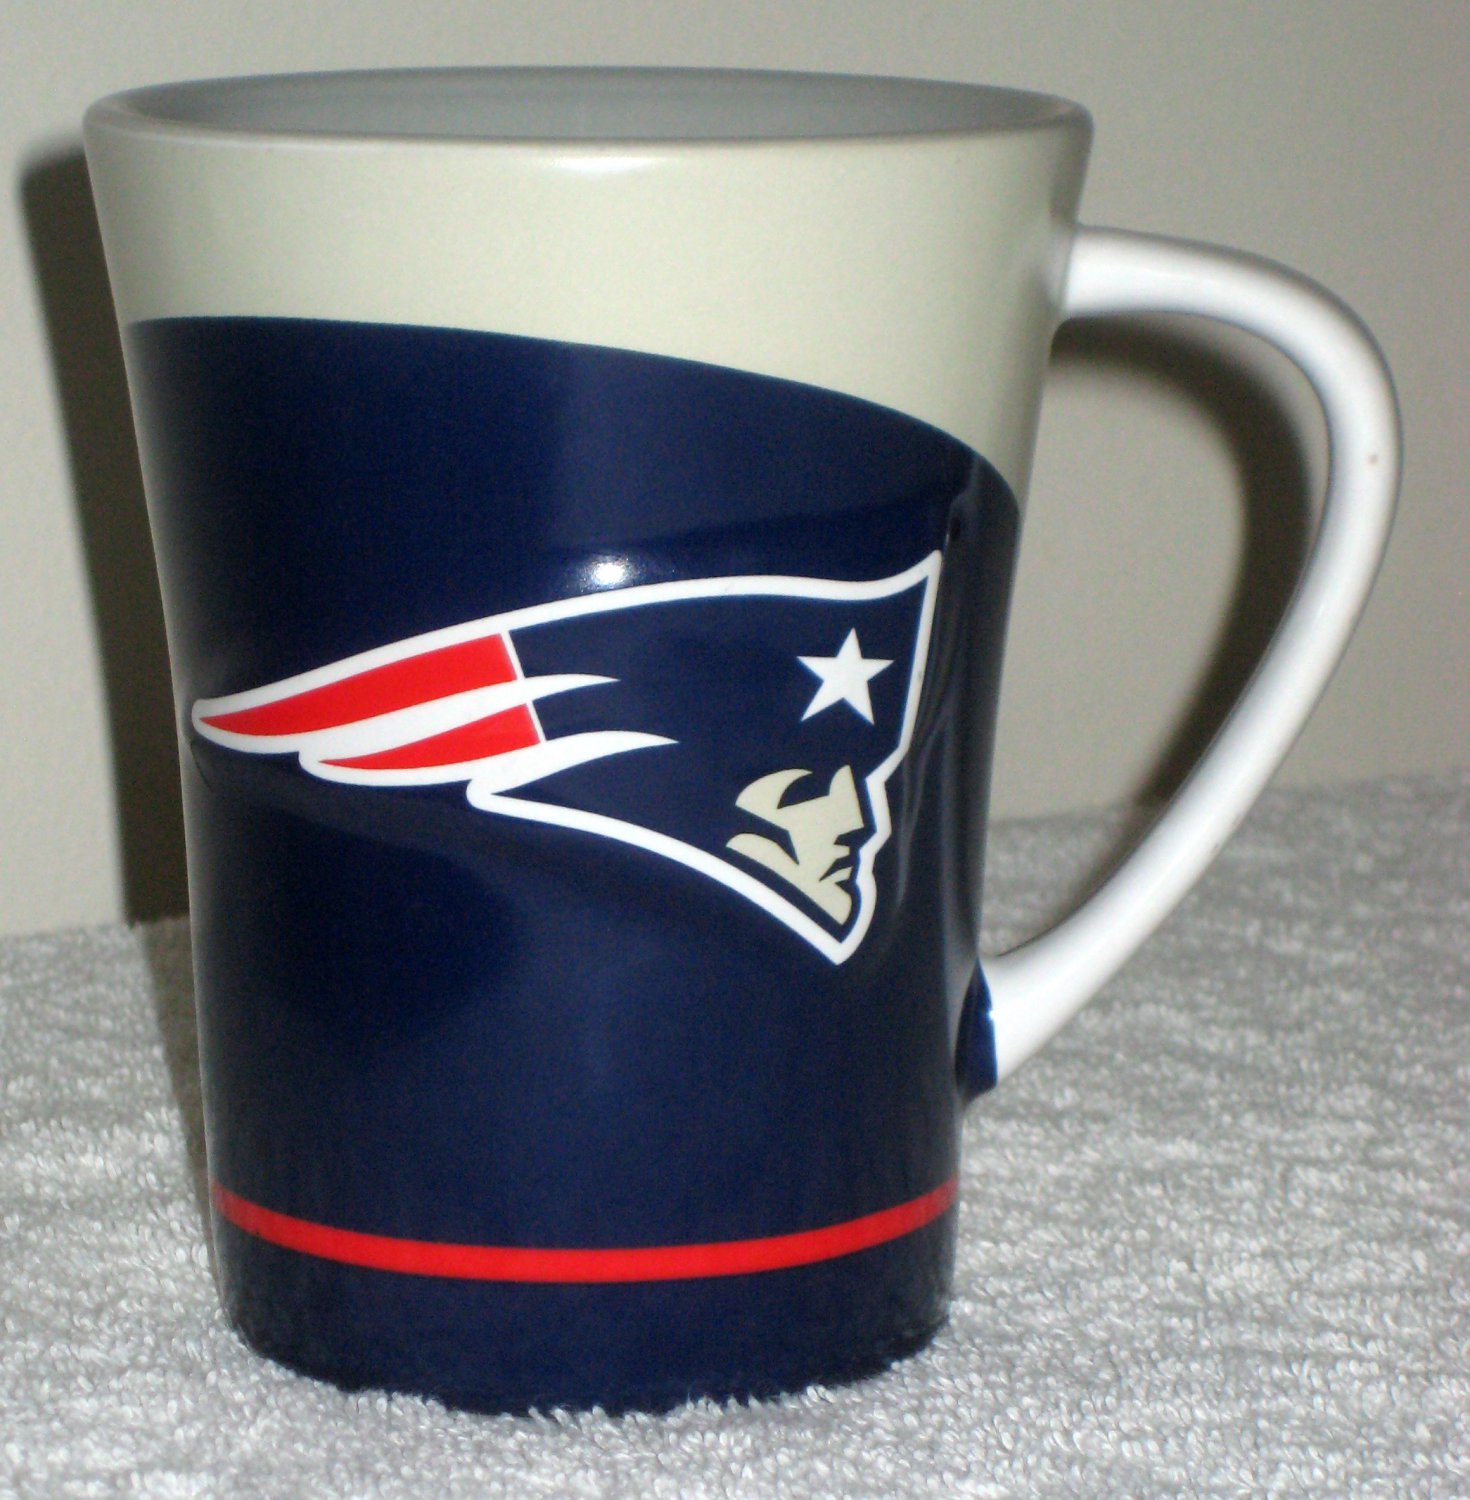 SOLD OUT New England Patriots Ceramic Coffee Mug Embossed